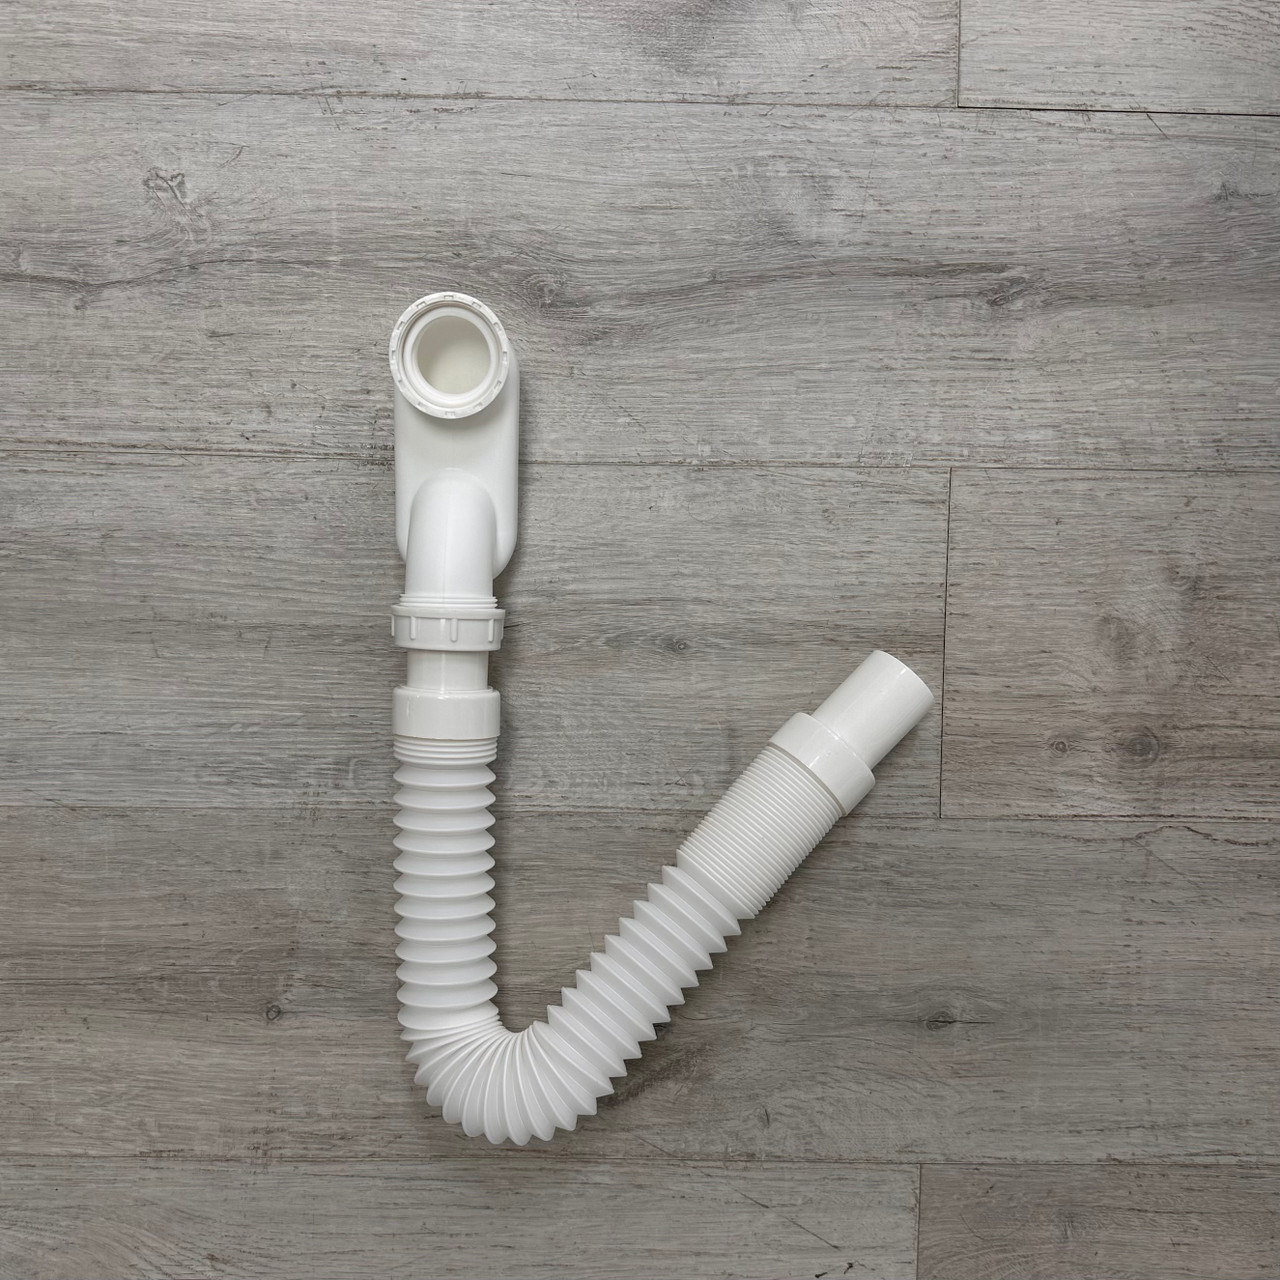 What fitting do I need? Freestanding tub came with this flexible drain hose  : r/Plumbing